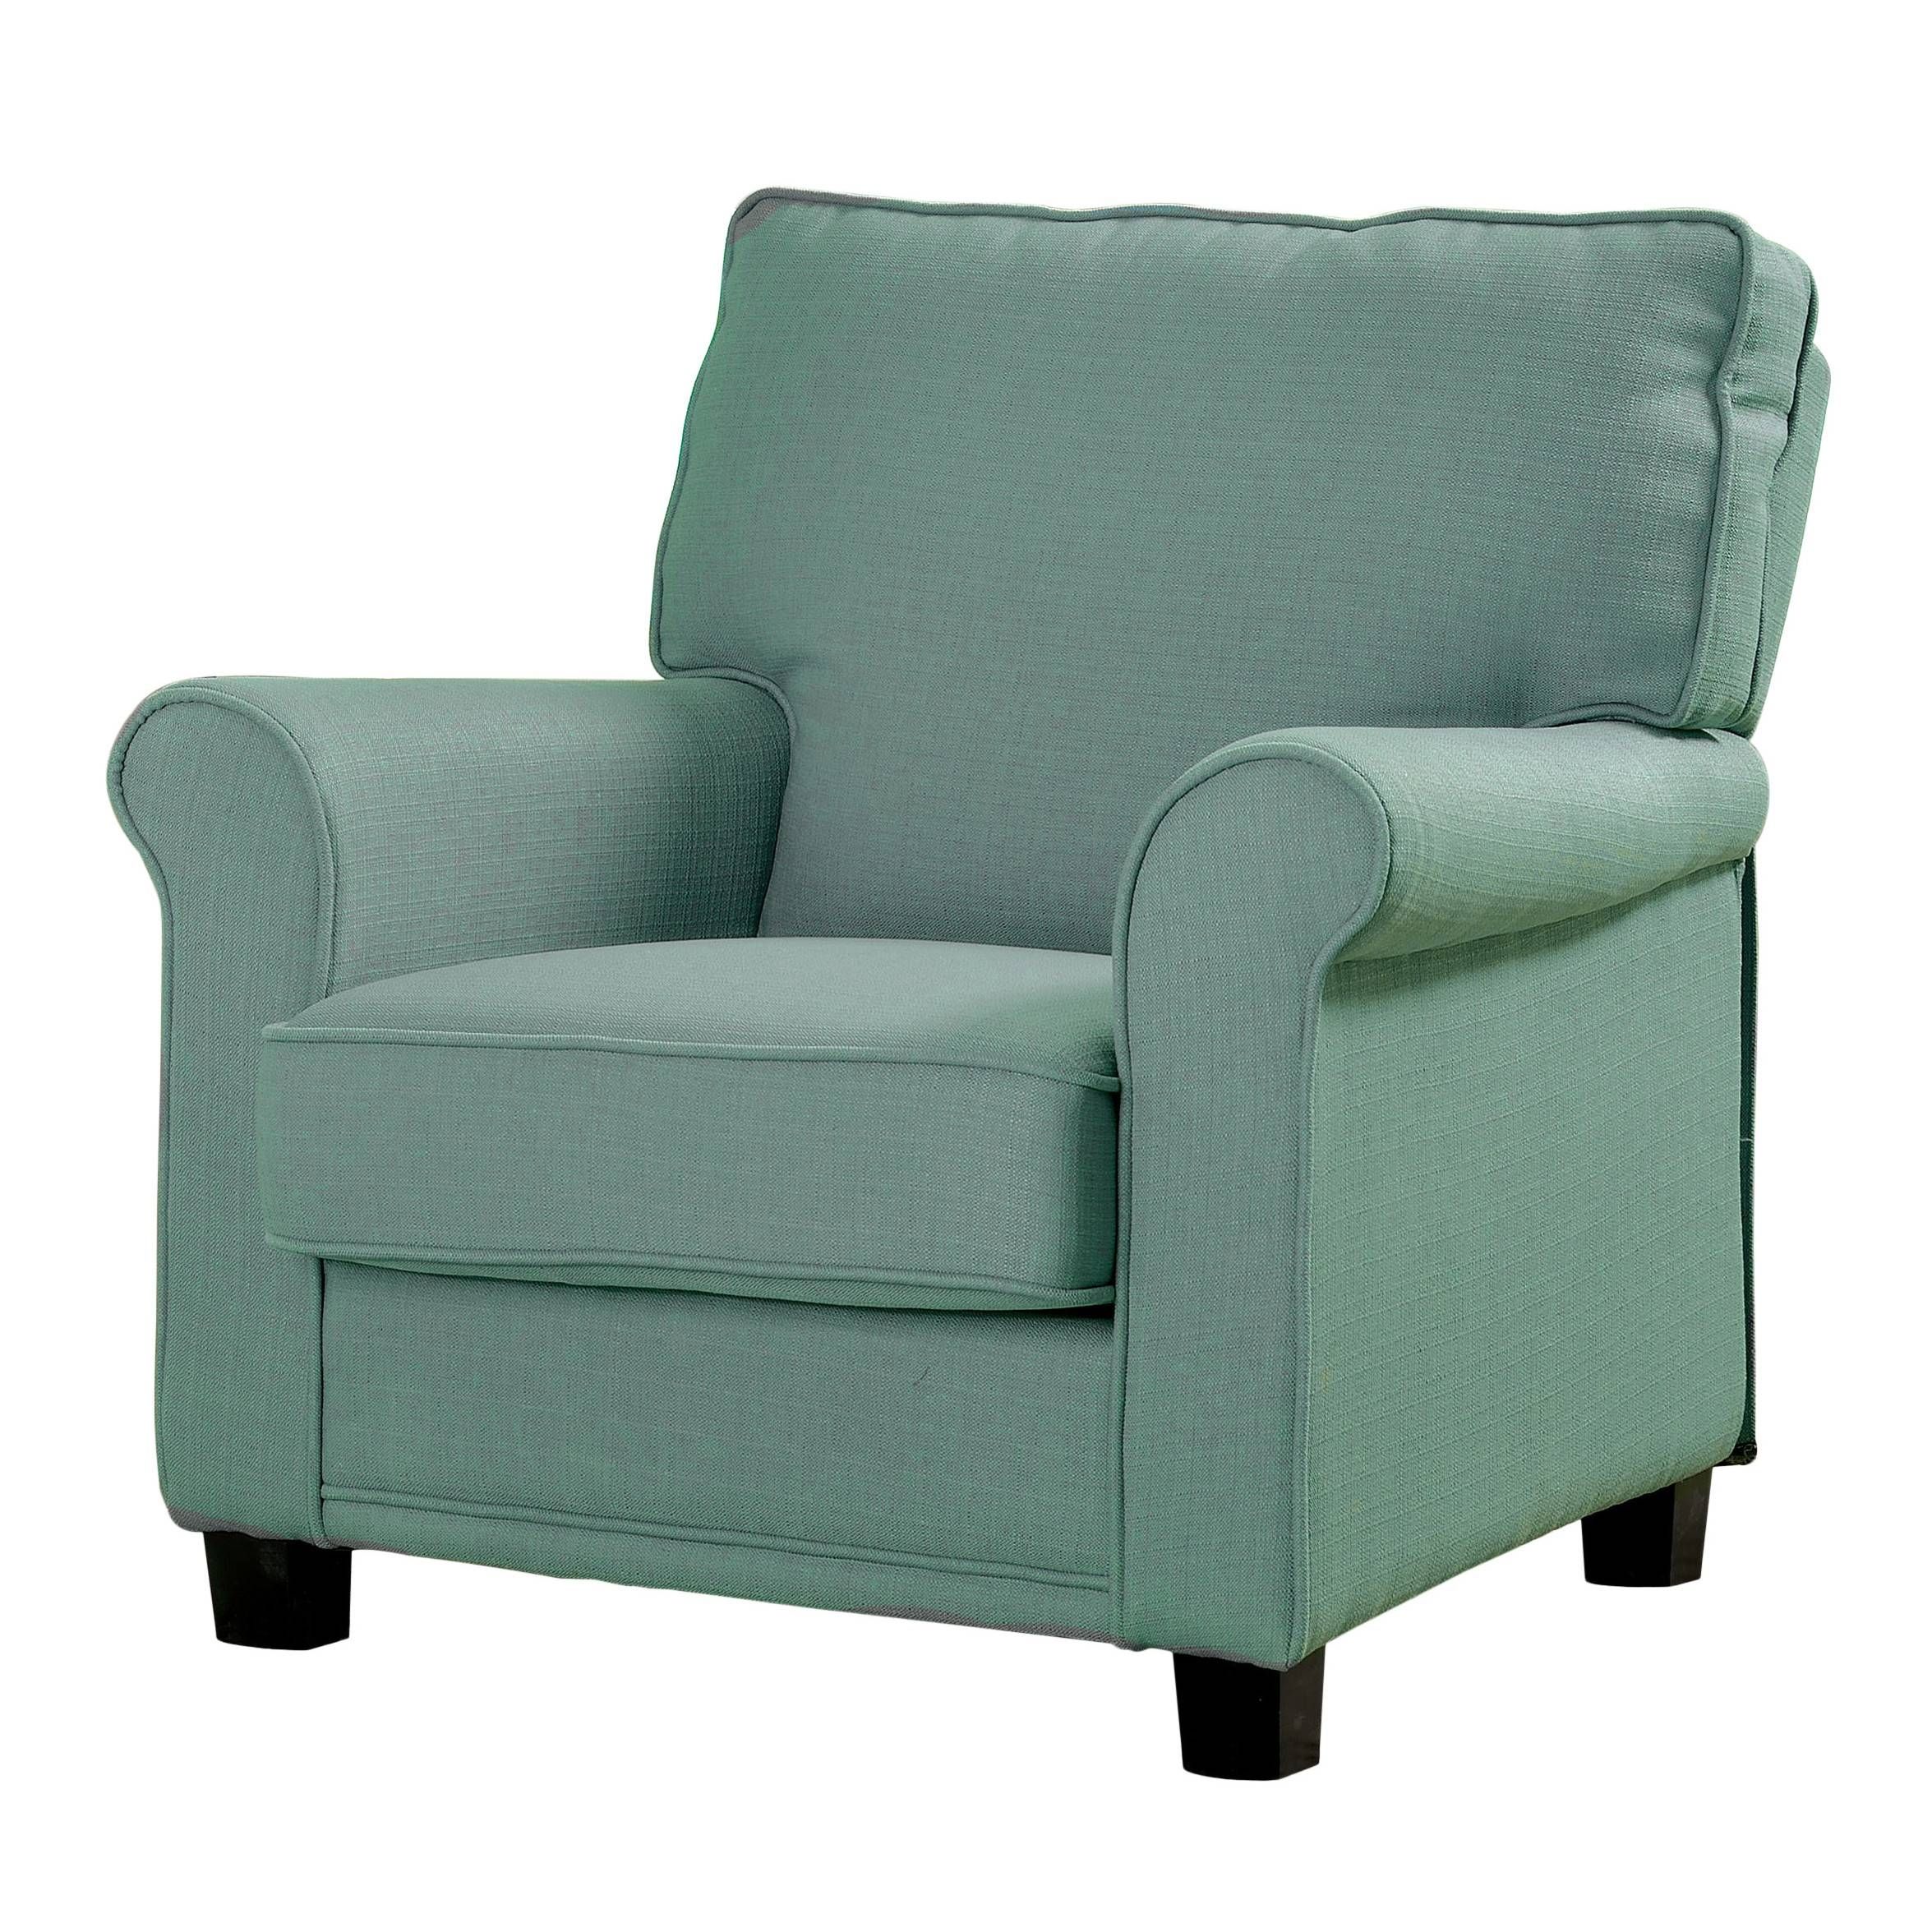 Comfortable Armchairs For Small Spaces : Comfortable Arm Chair Intended For Small Arm Chairs (View 21 of 30)